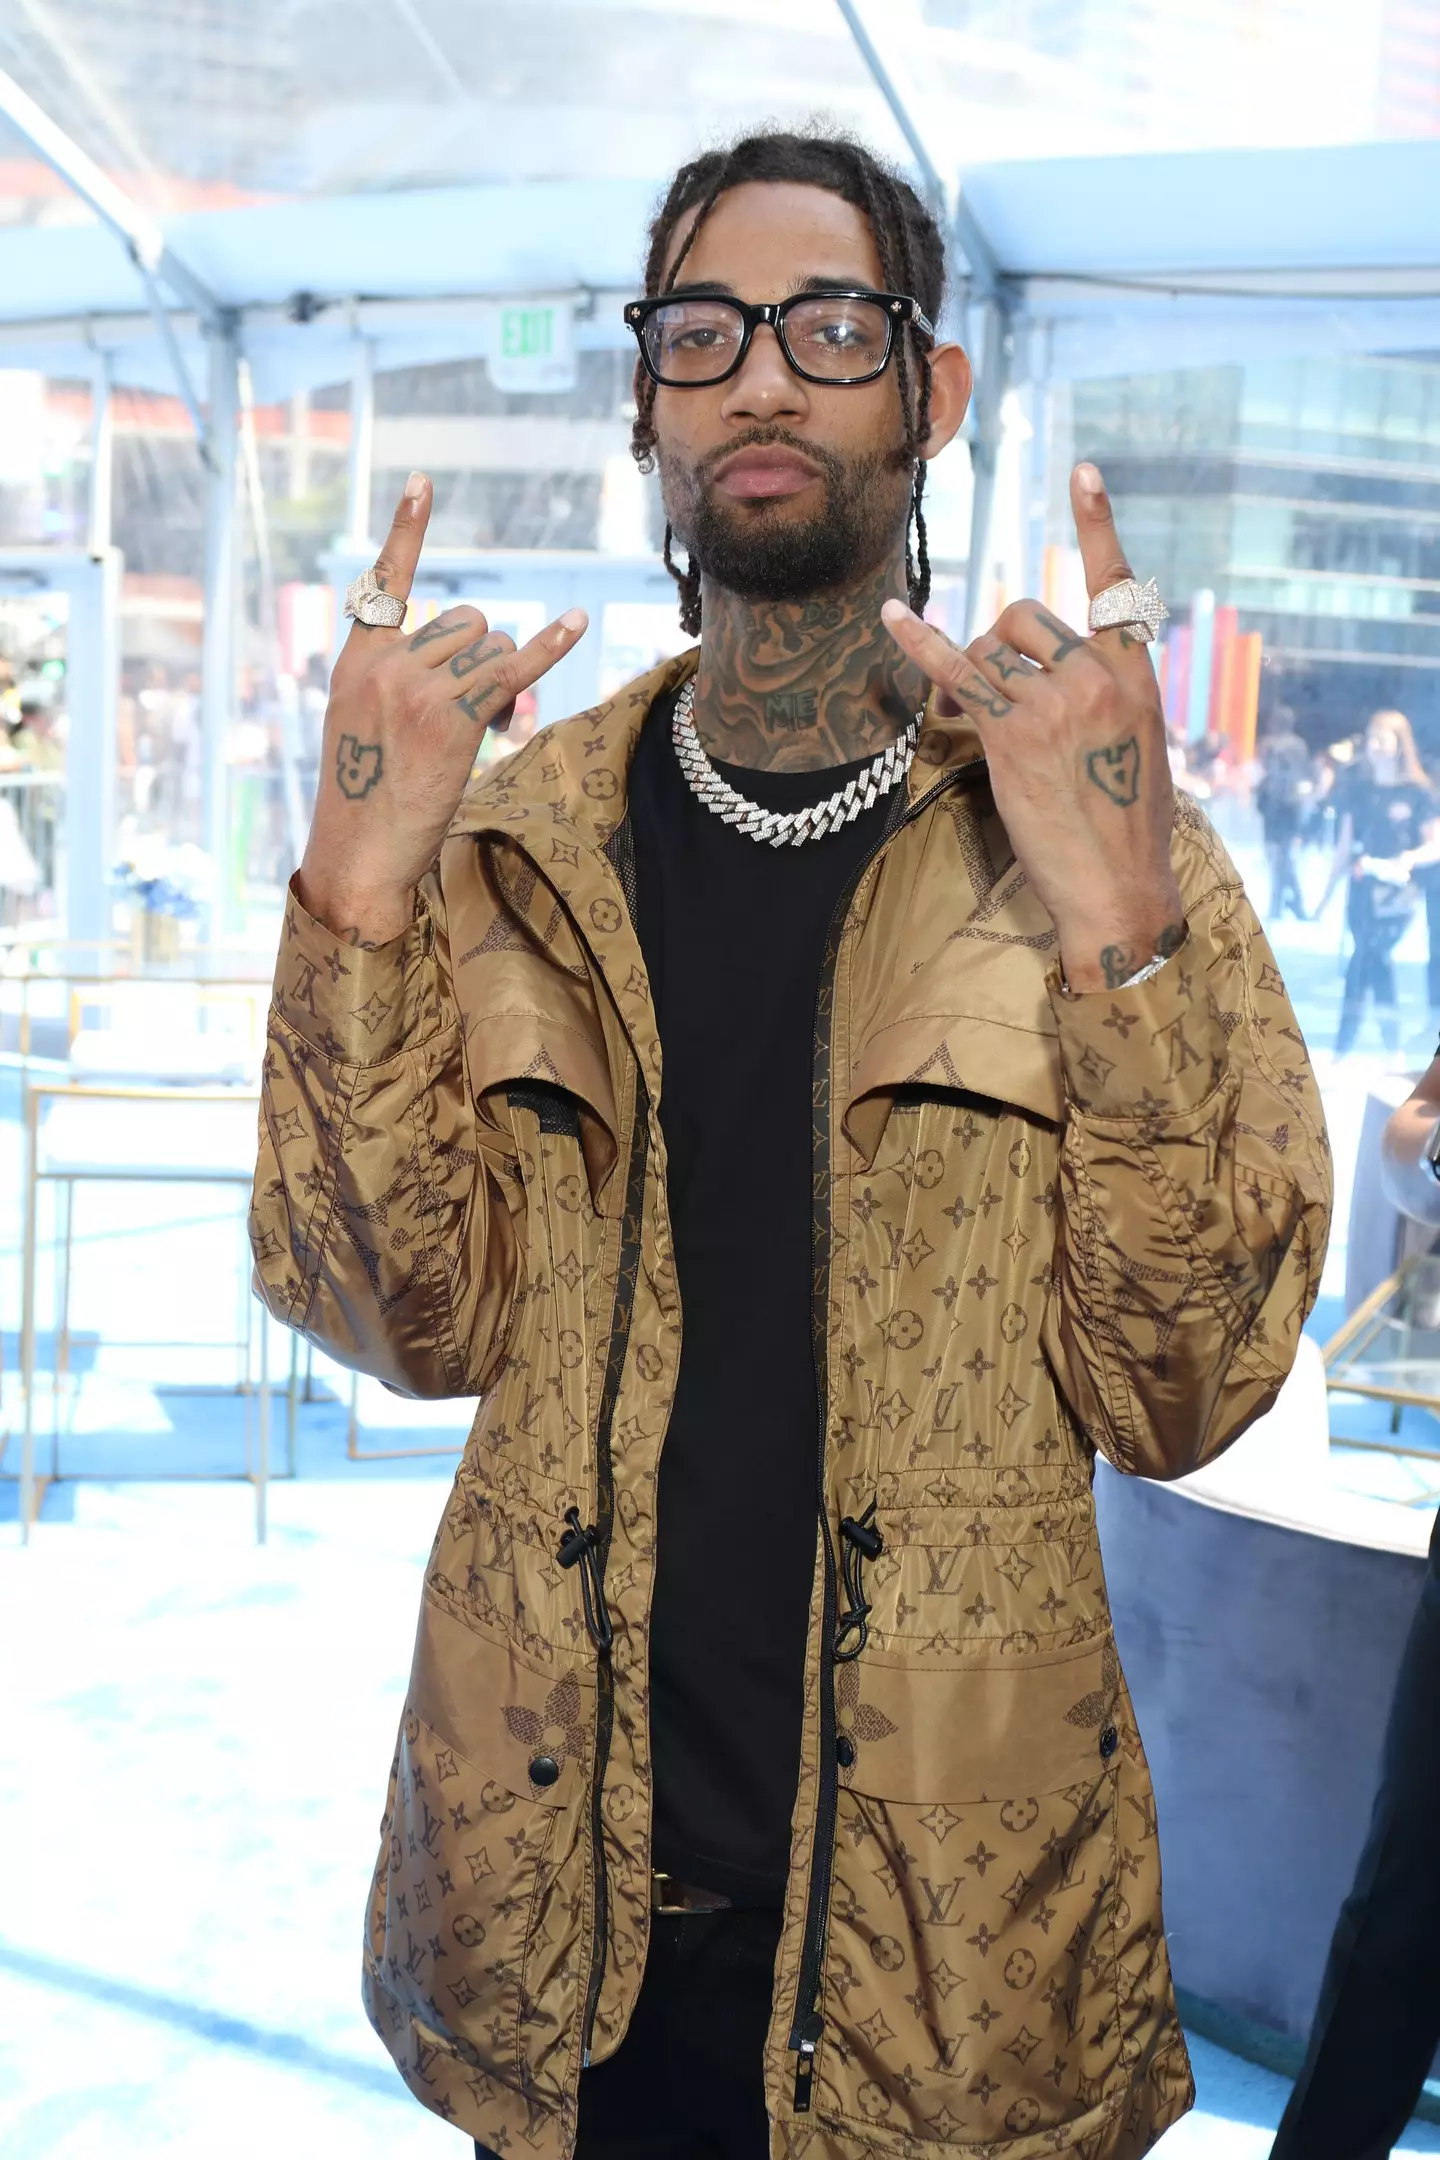 American rapper PnB Rock passed away on Monday, 12 September.